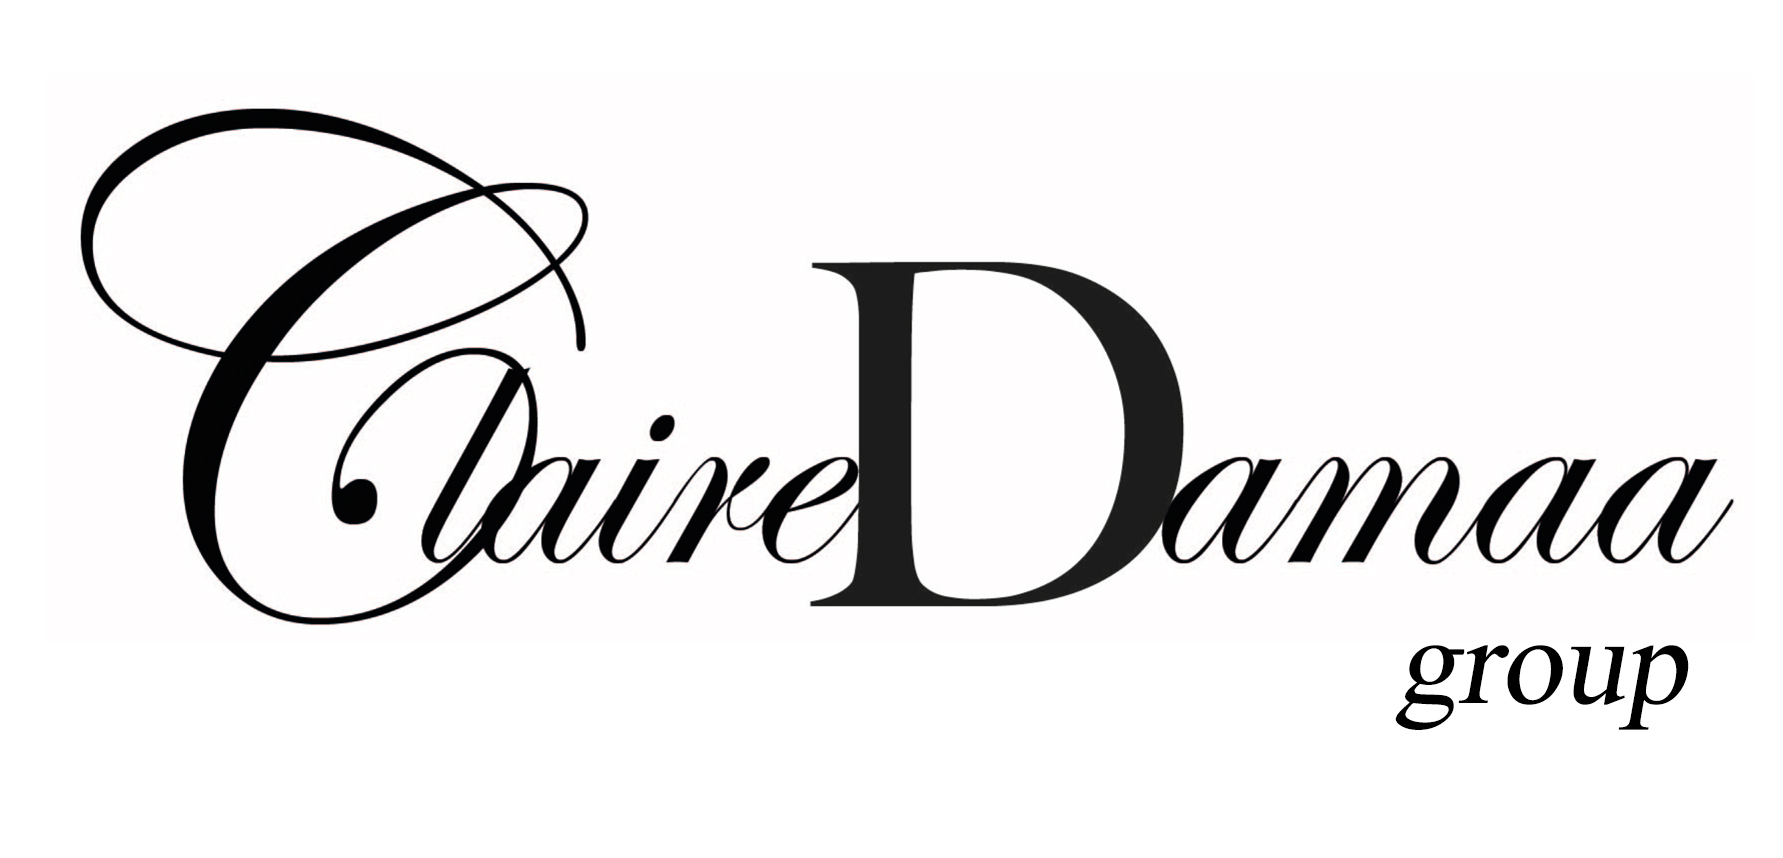 claire damaa group logo